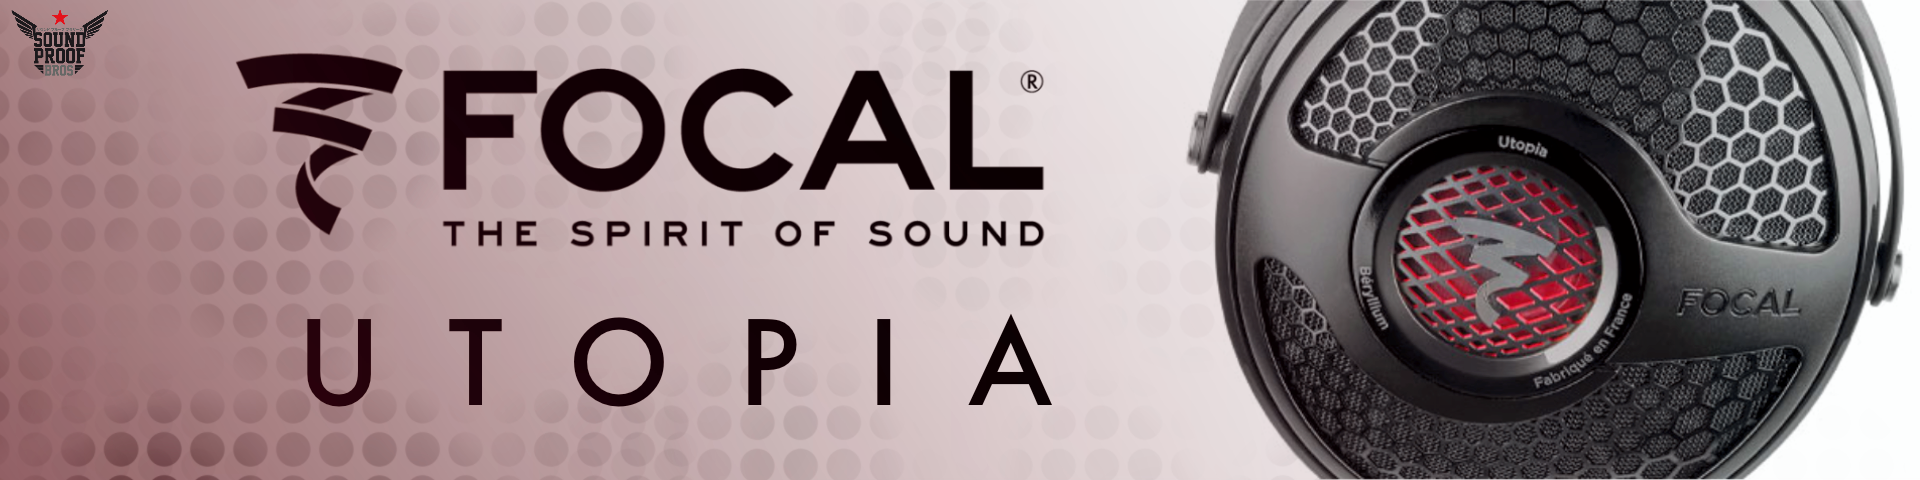 Focal UTOPIA SOUND PURITY AT ITS FINEST